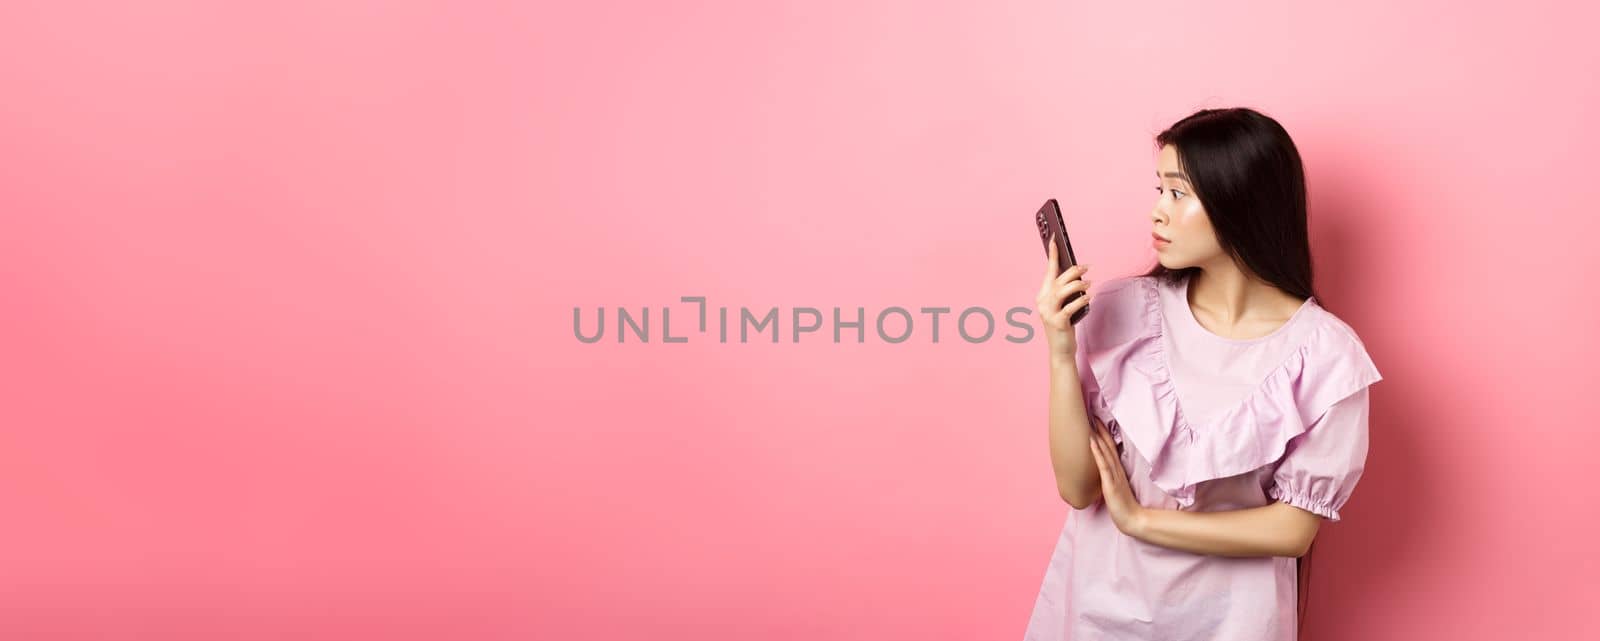 Asian girl look surprised at smartphone screen, reading message, standing in dress against pink background.